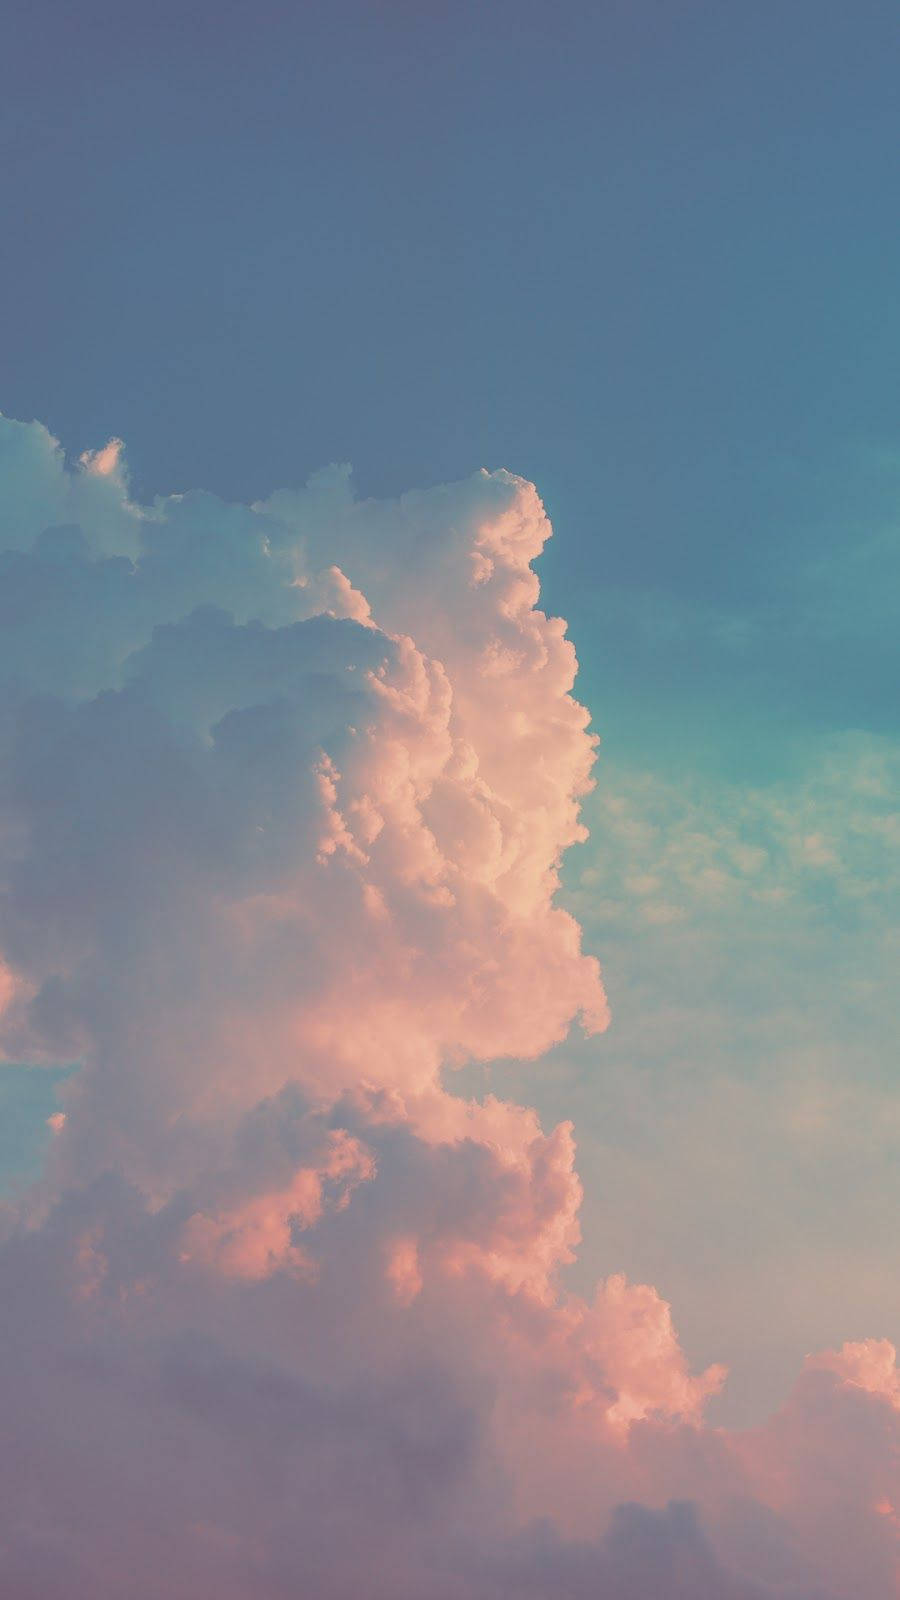 Take In The Calming Sight Of The Aesthetic Cloud